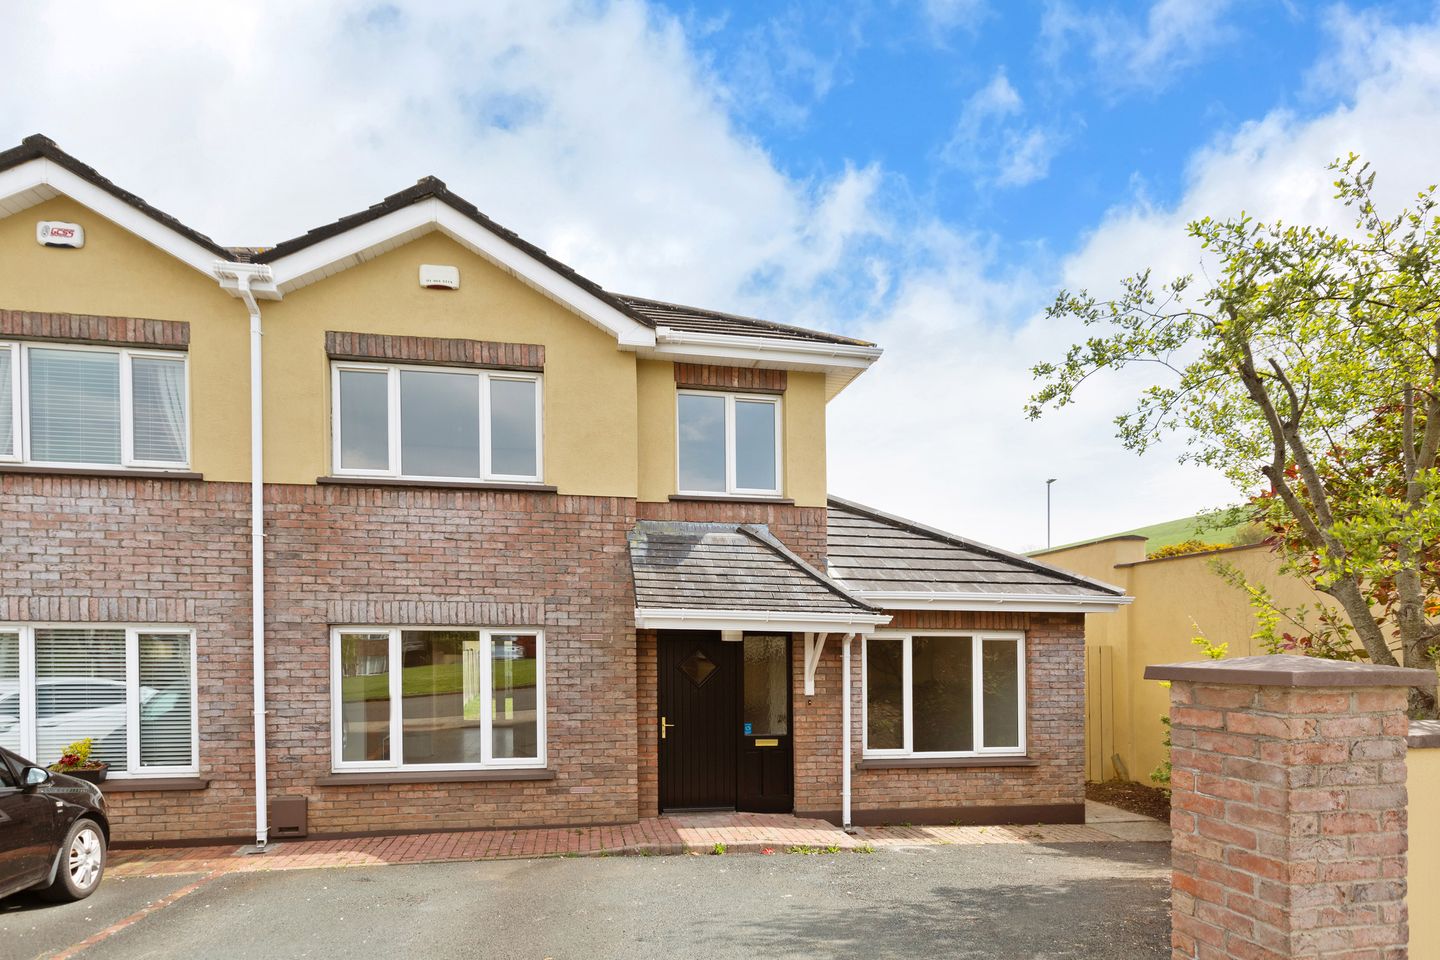 96 Graham's Court, Wicklow Town, Co. Wicklow